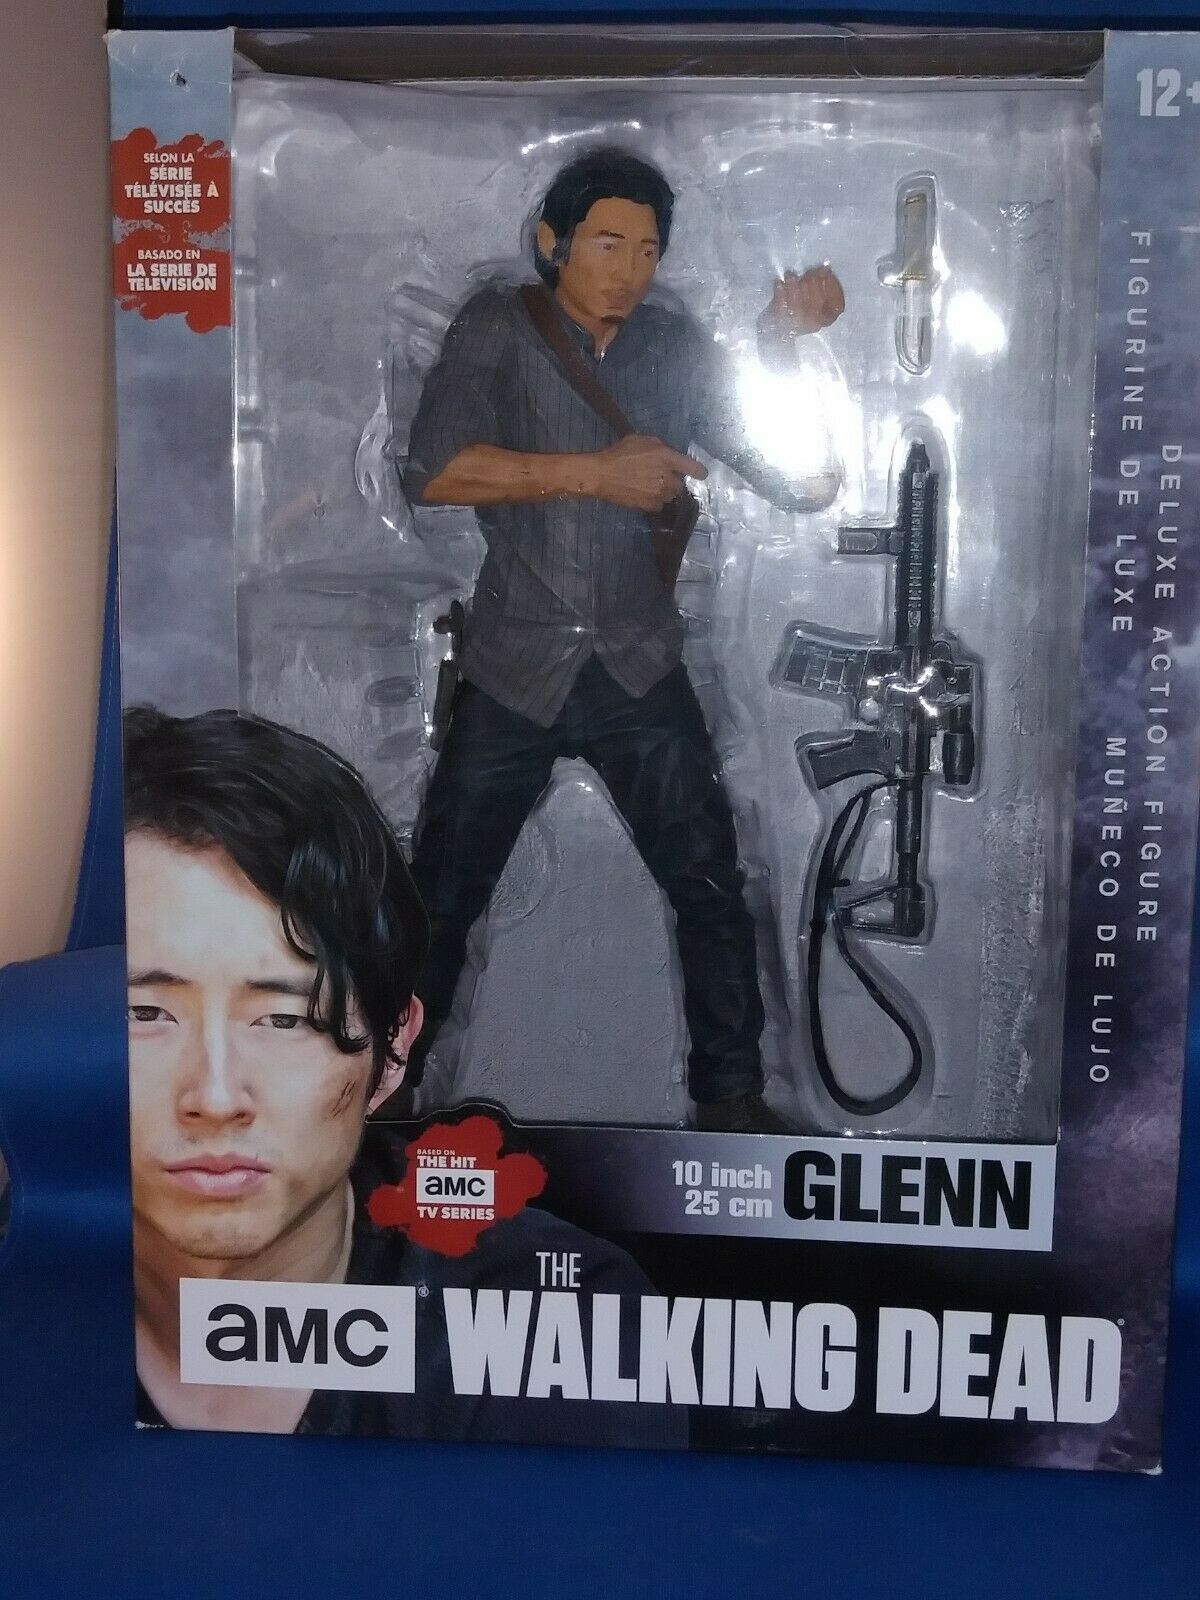 Primary image for ACTION FIGURE Glenn THE WALKING DEAD 10 Inch 25 cm MCFARLANE TOYS